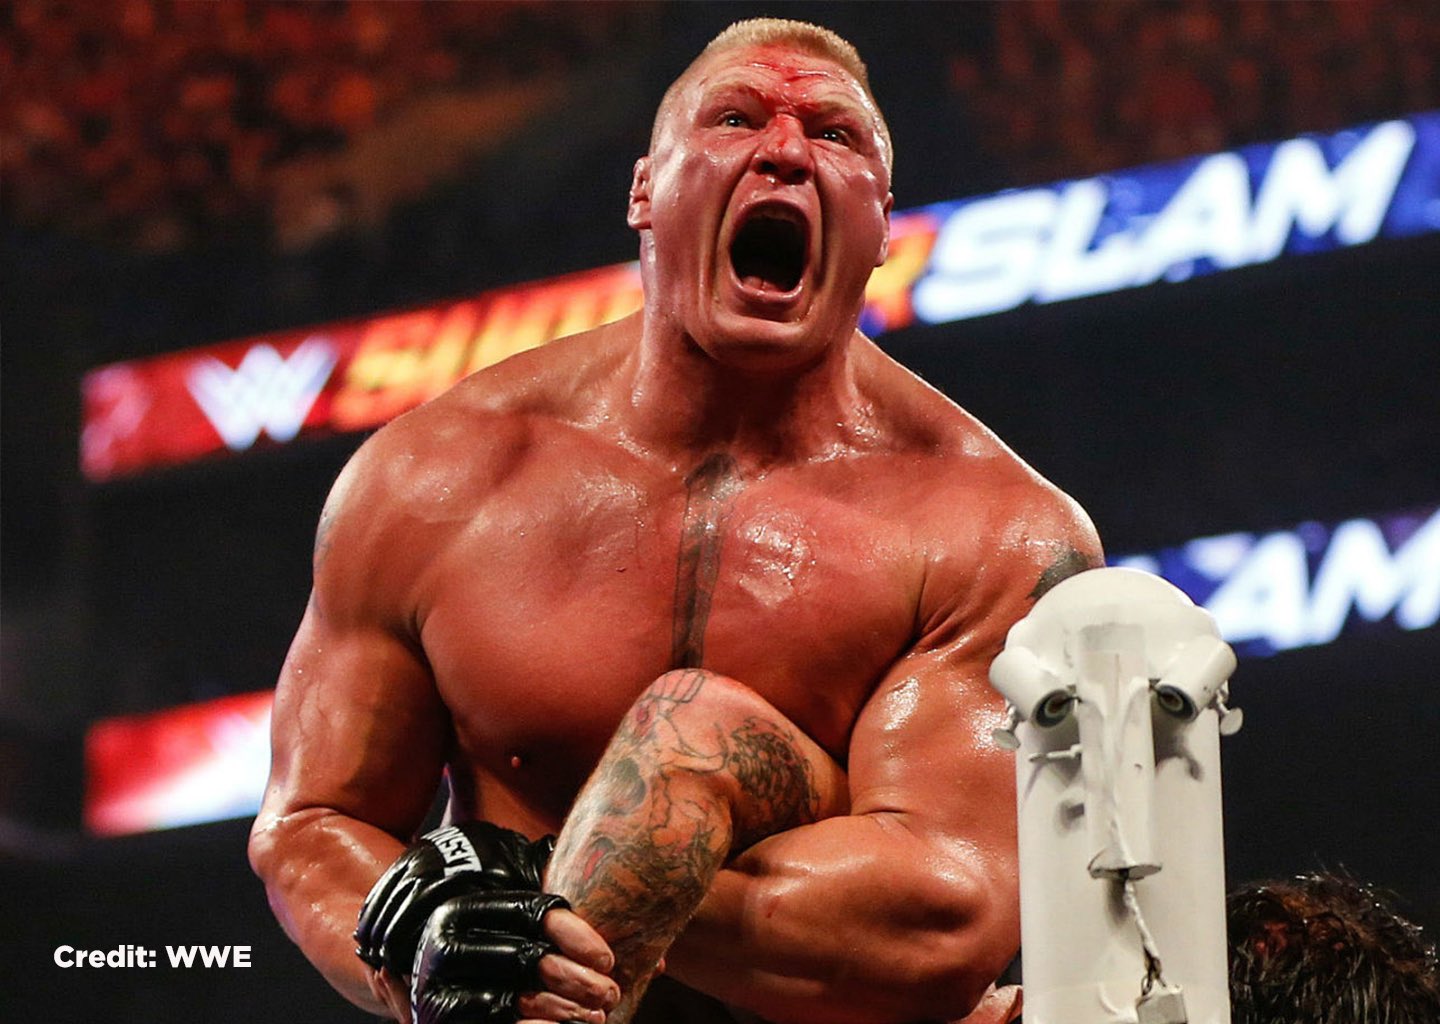 Happy 43rd birthday to the Beast, Brock Lesnar! 